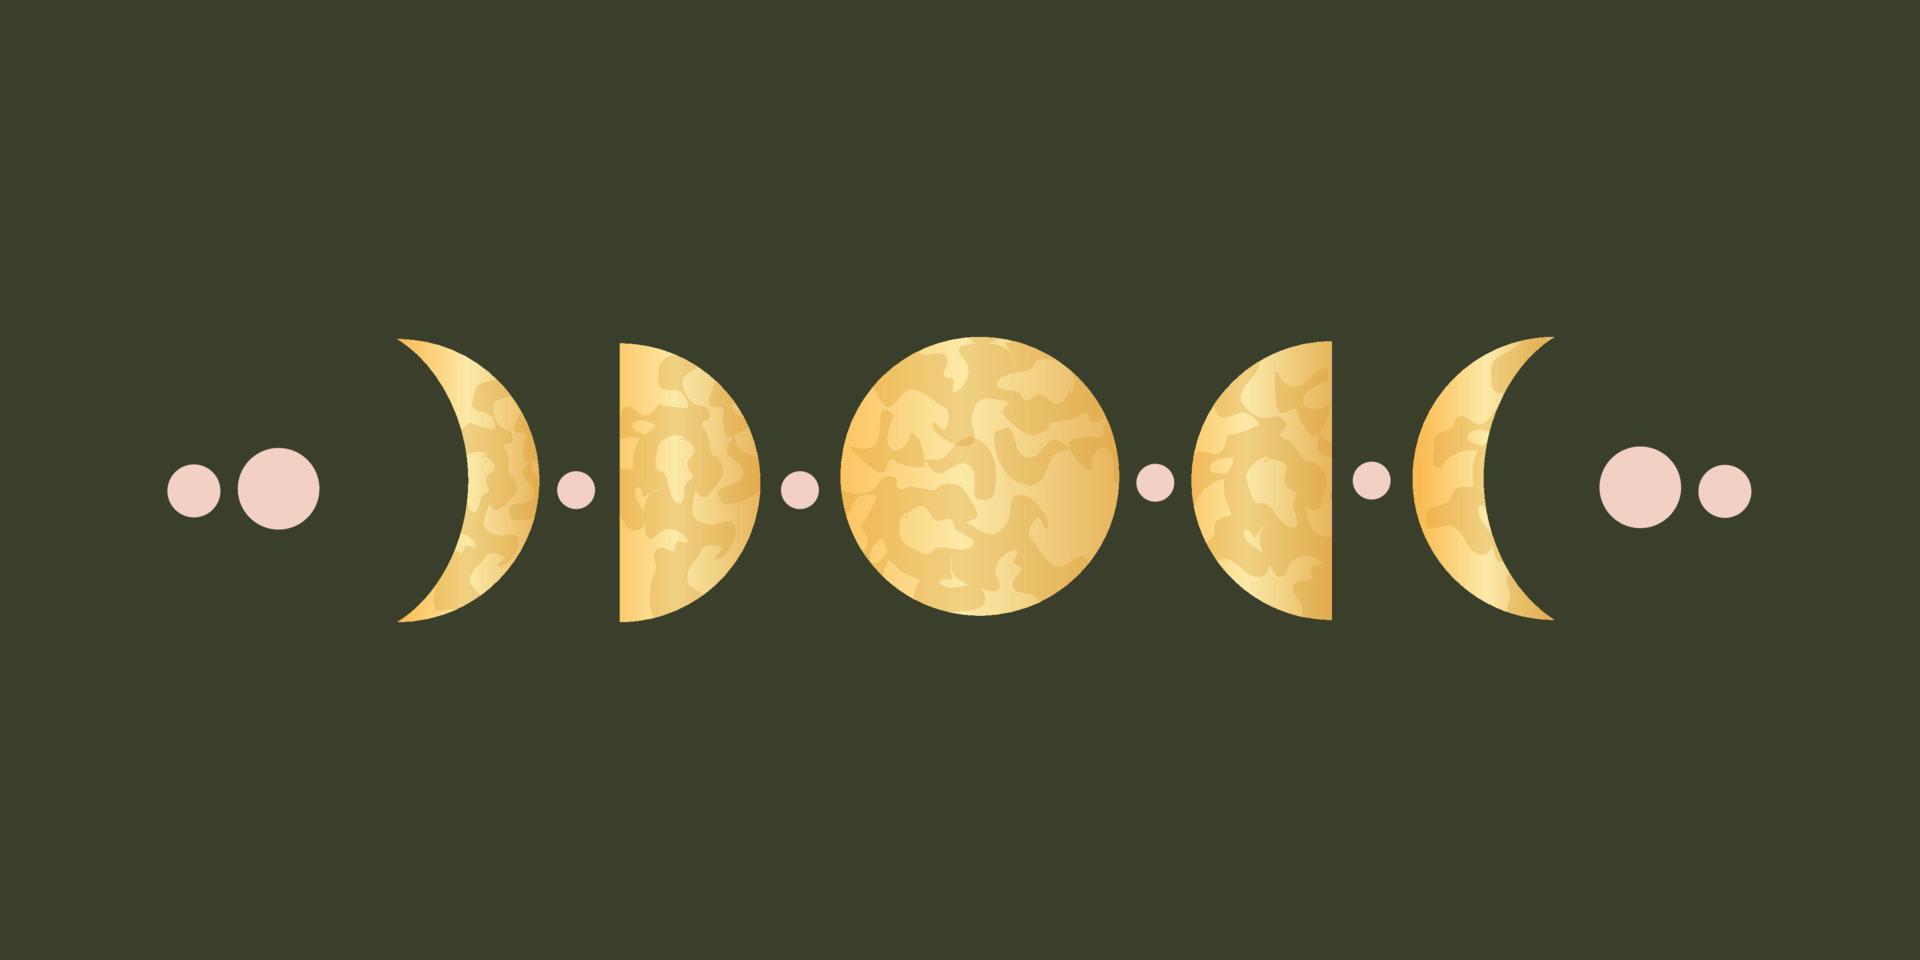 Moon phases for pagan sacred astrology. Celestial complete cycle of moons with decorations. Vector illustration